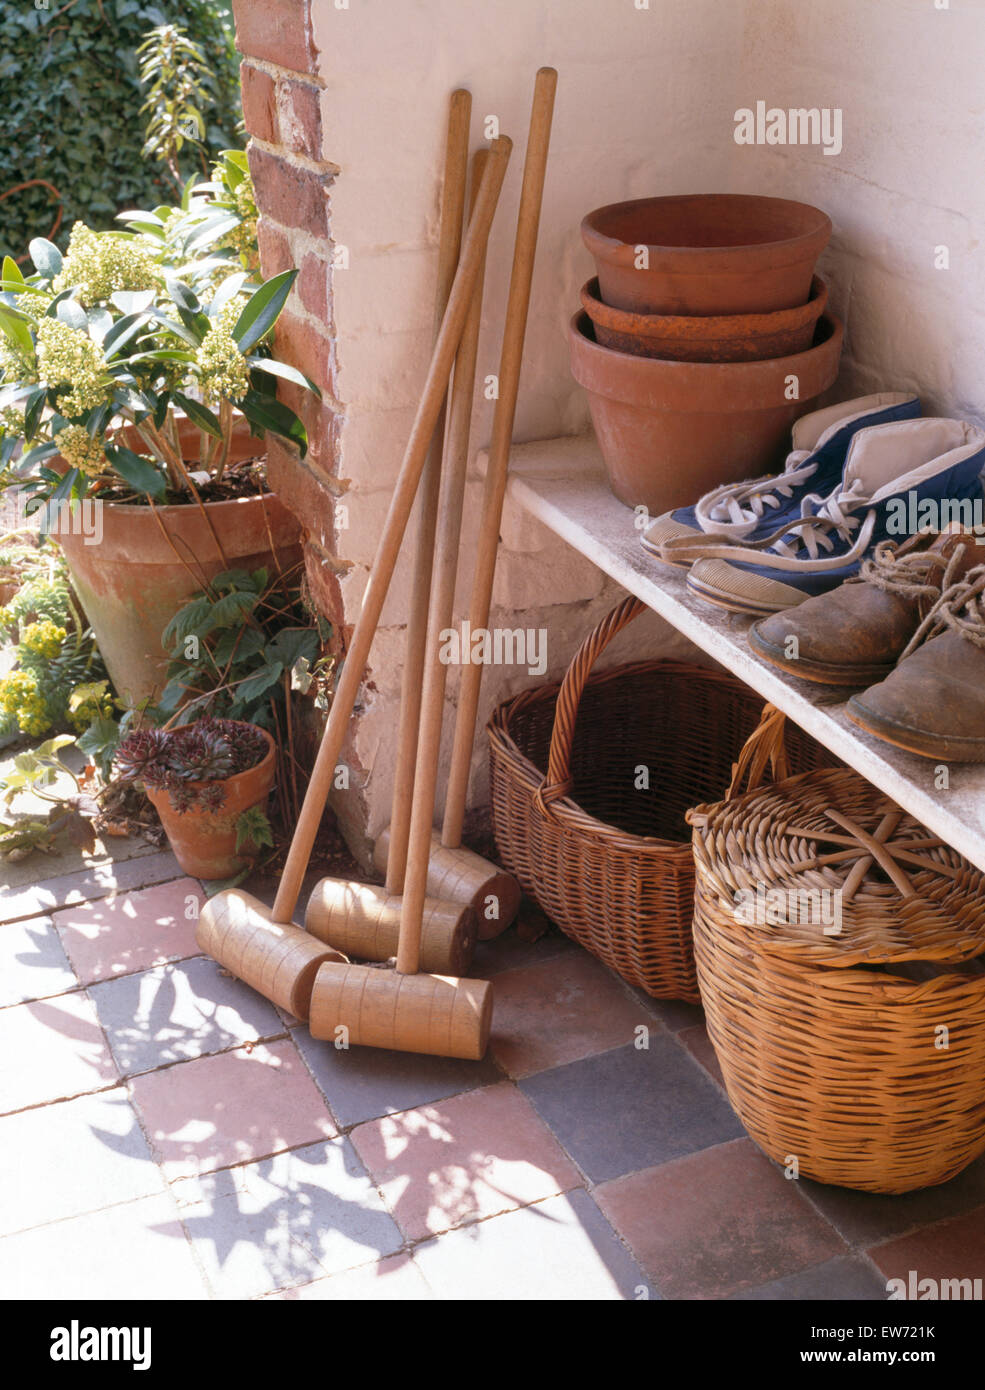 Close-up of wooden croquet mallets in porch with boots and baskets Stock Photo